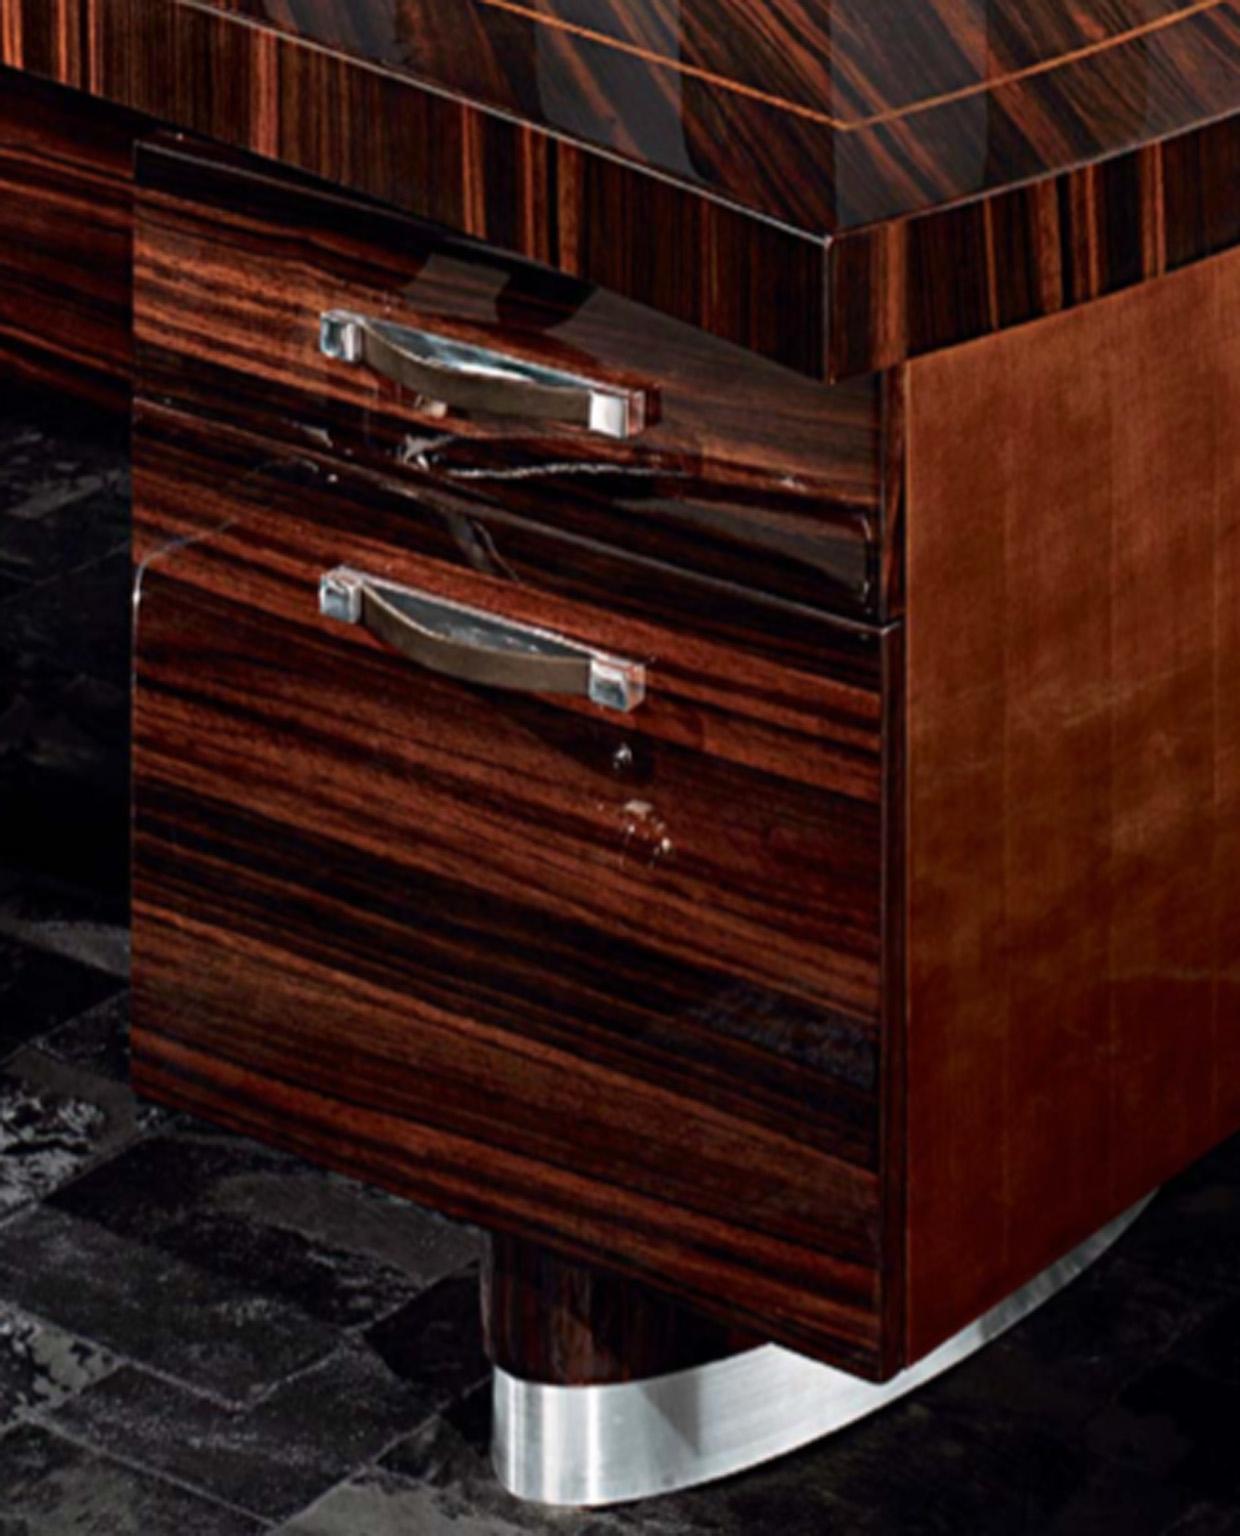 Hand-Crafted Giorgio Collection Ebony Macassar and Sycamore Desk in High Gloss Finish